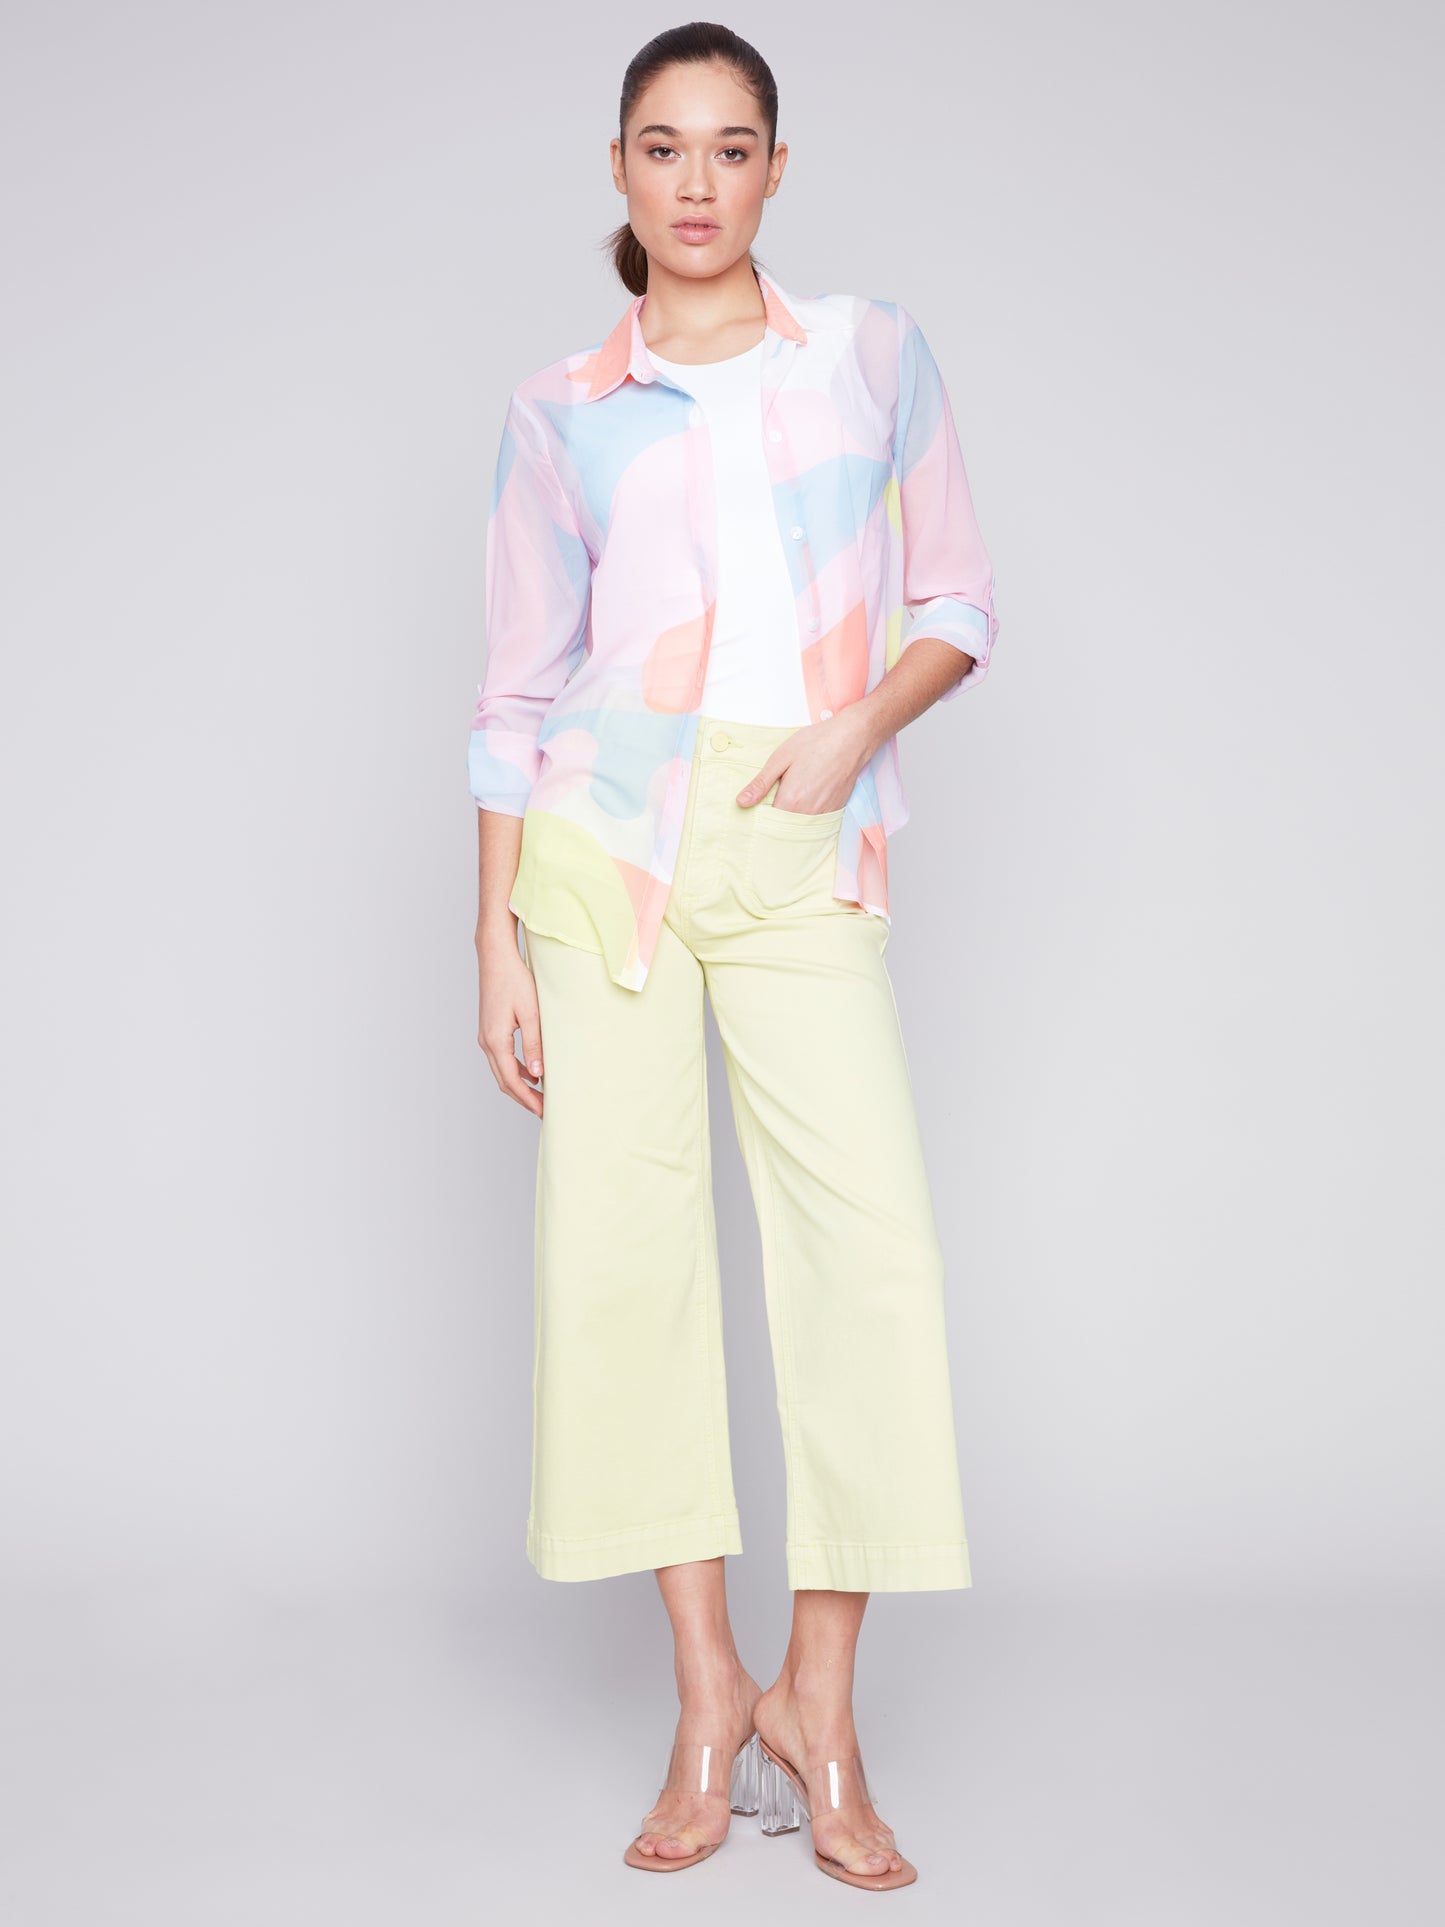 Woman posing in a Charlie B printed chiffon blouse with a cute design and light yellow pants.